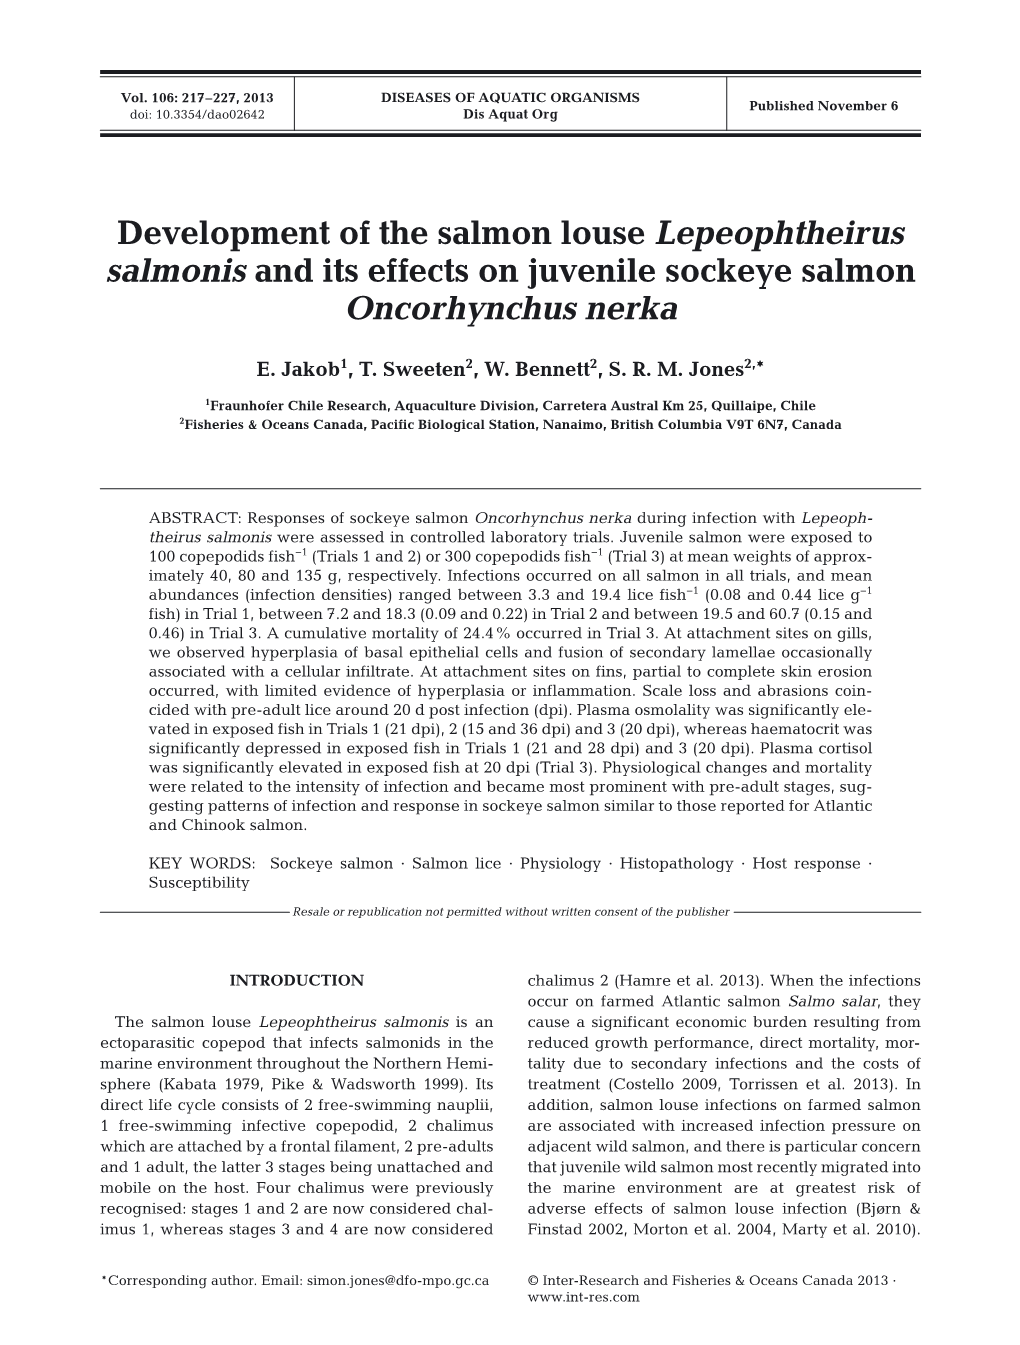 Development of the Salmon Louse Lepeophtheirus Salmonis and Its Effects on Juvenile Sockeye Salmon Oncorhynchus Nerka